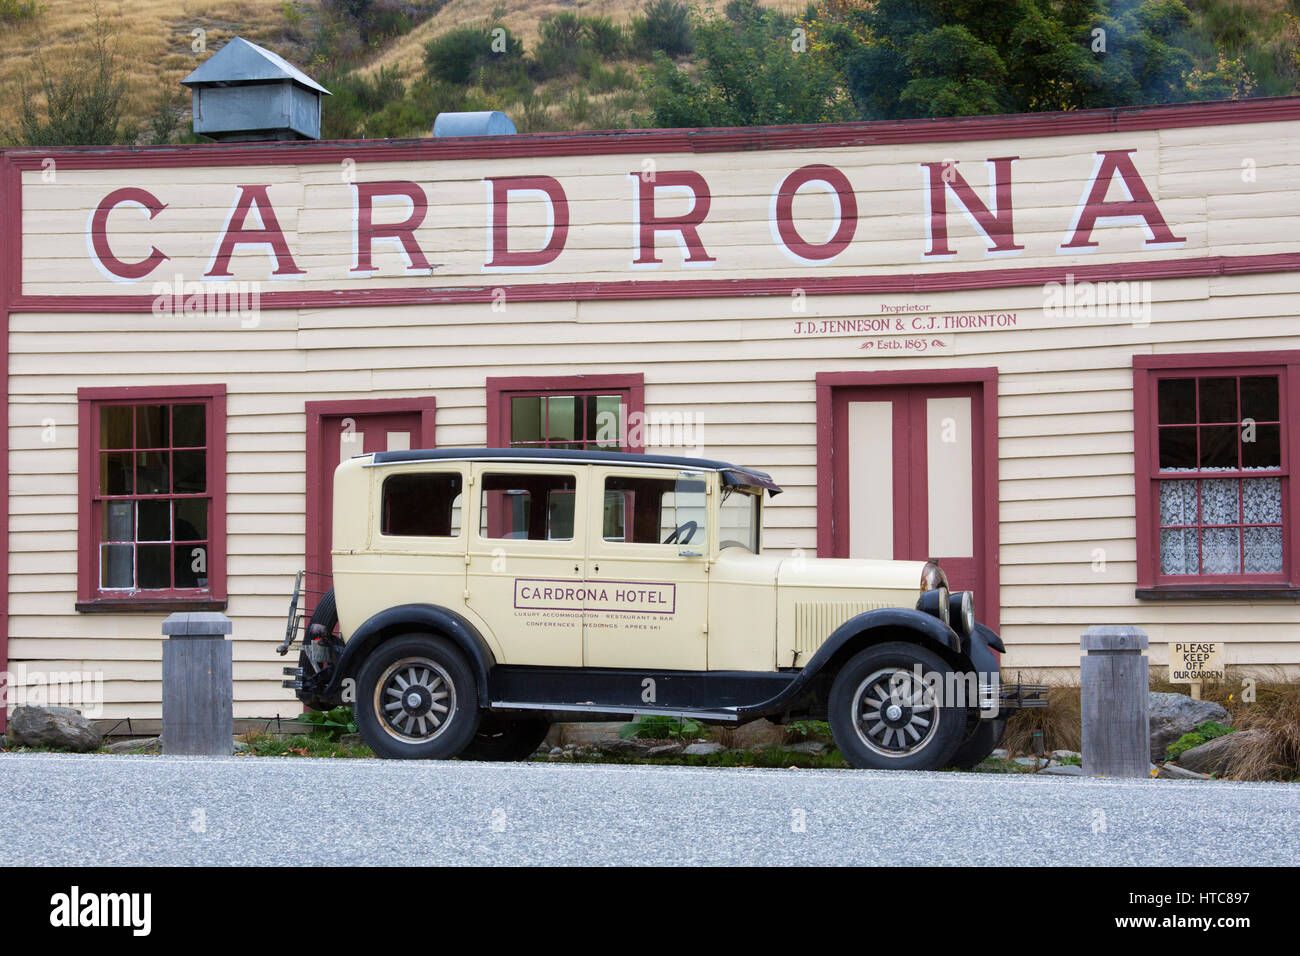 Cardrona, Otago, New Zealand. Façade of the historic Cardrona Hotel, established in 1863, vintage car parked in front. Stock Photo